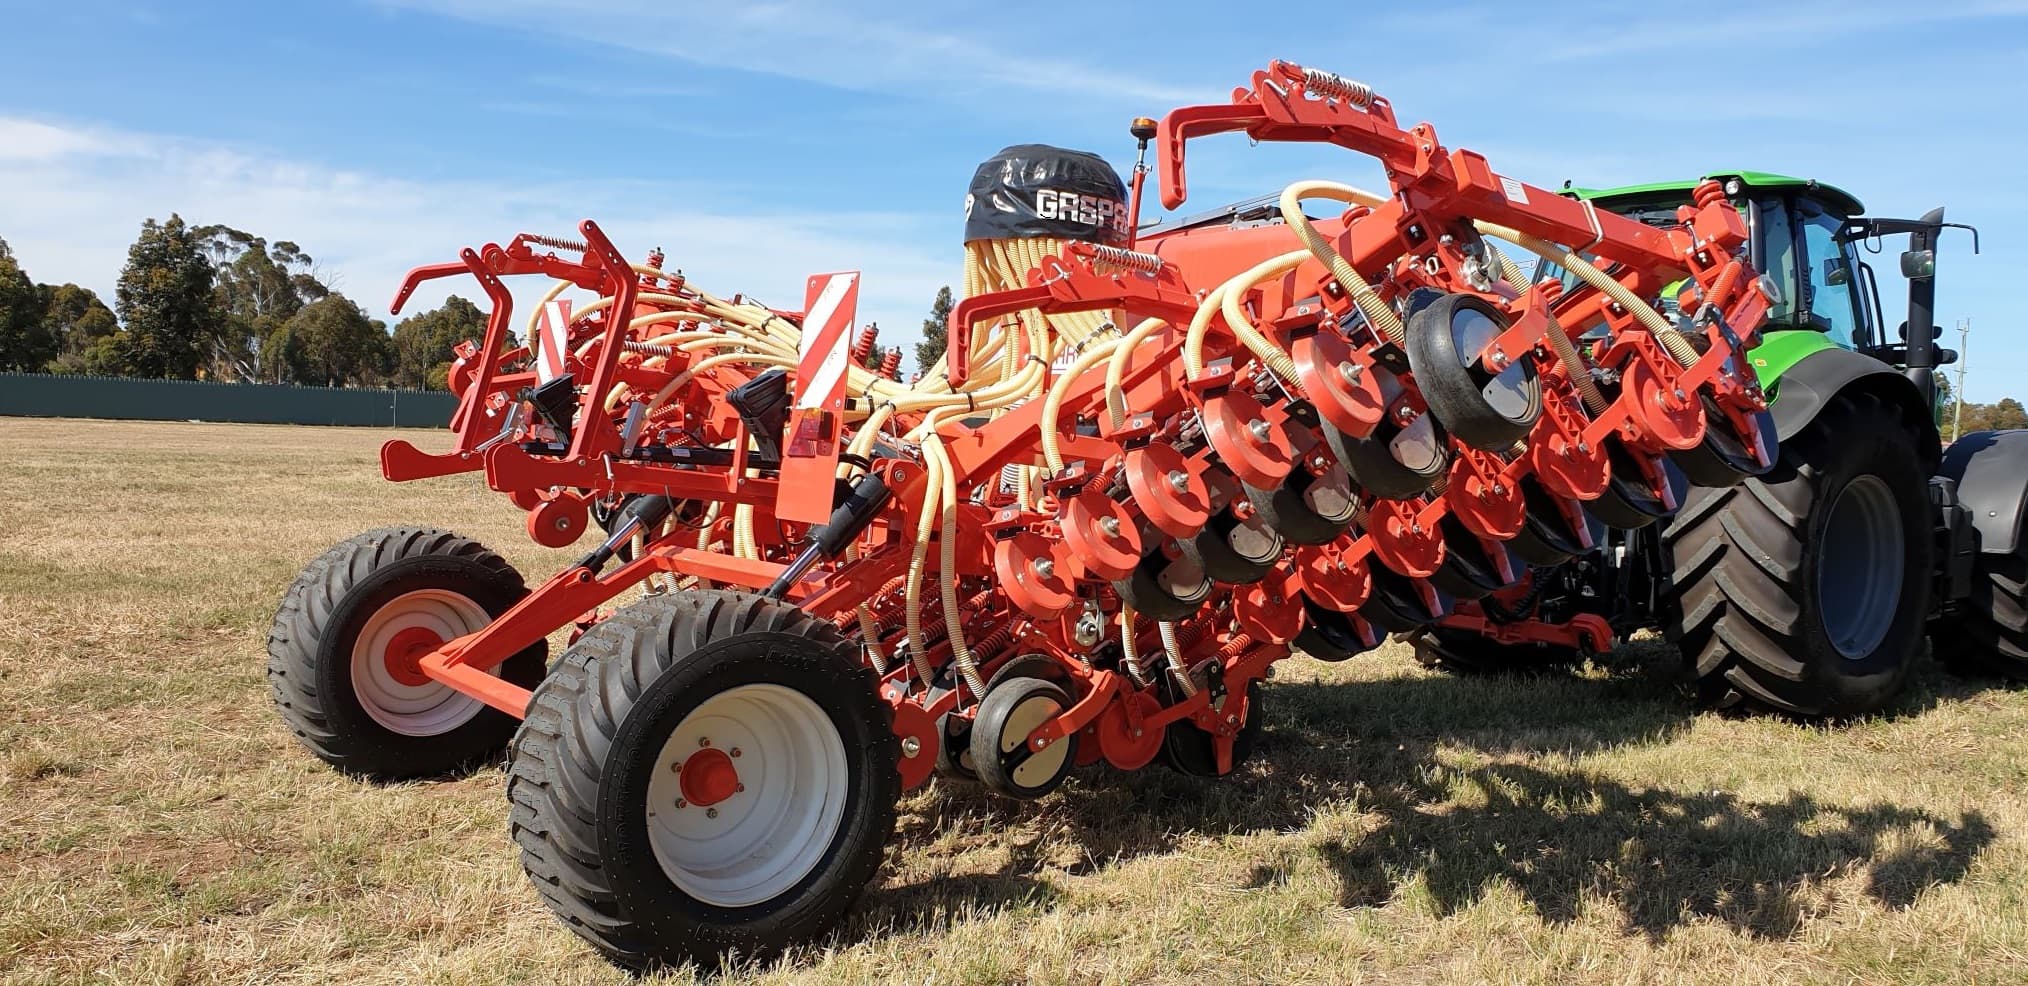 Delmade Demo Day 2019 Featured Product - The NEW Gigante Seed Drill Pressure - Pneumatic Seed Drill.